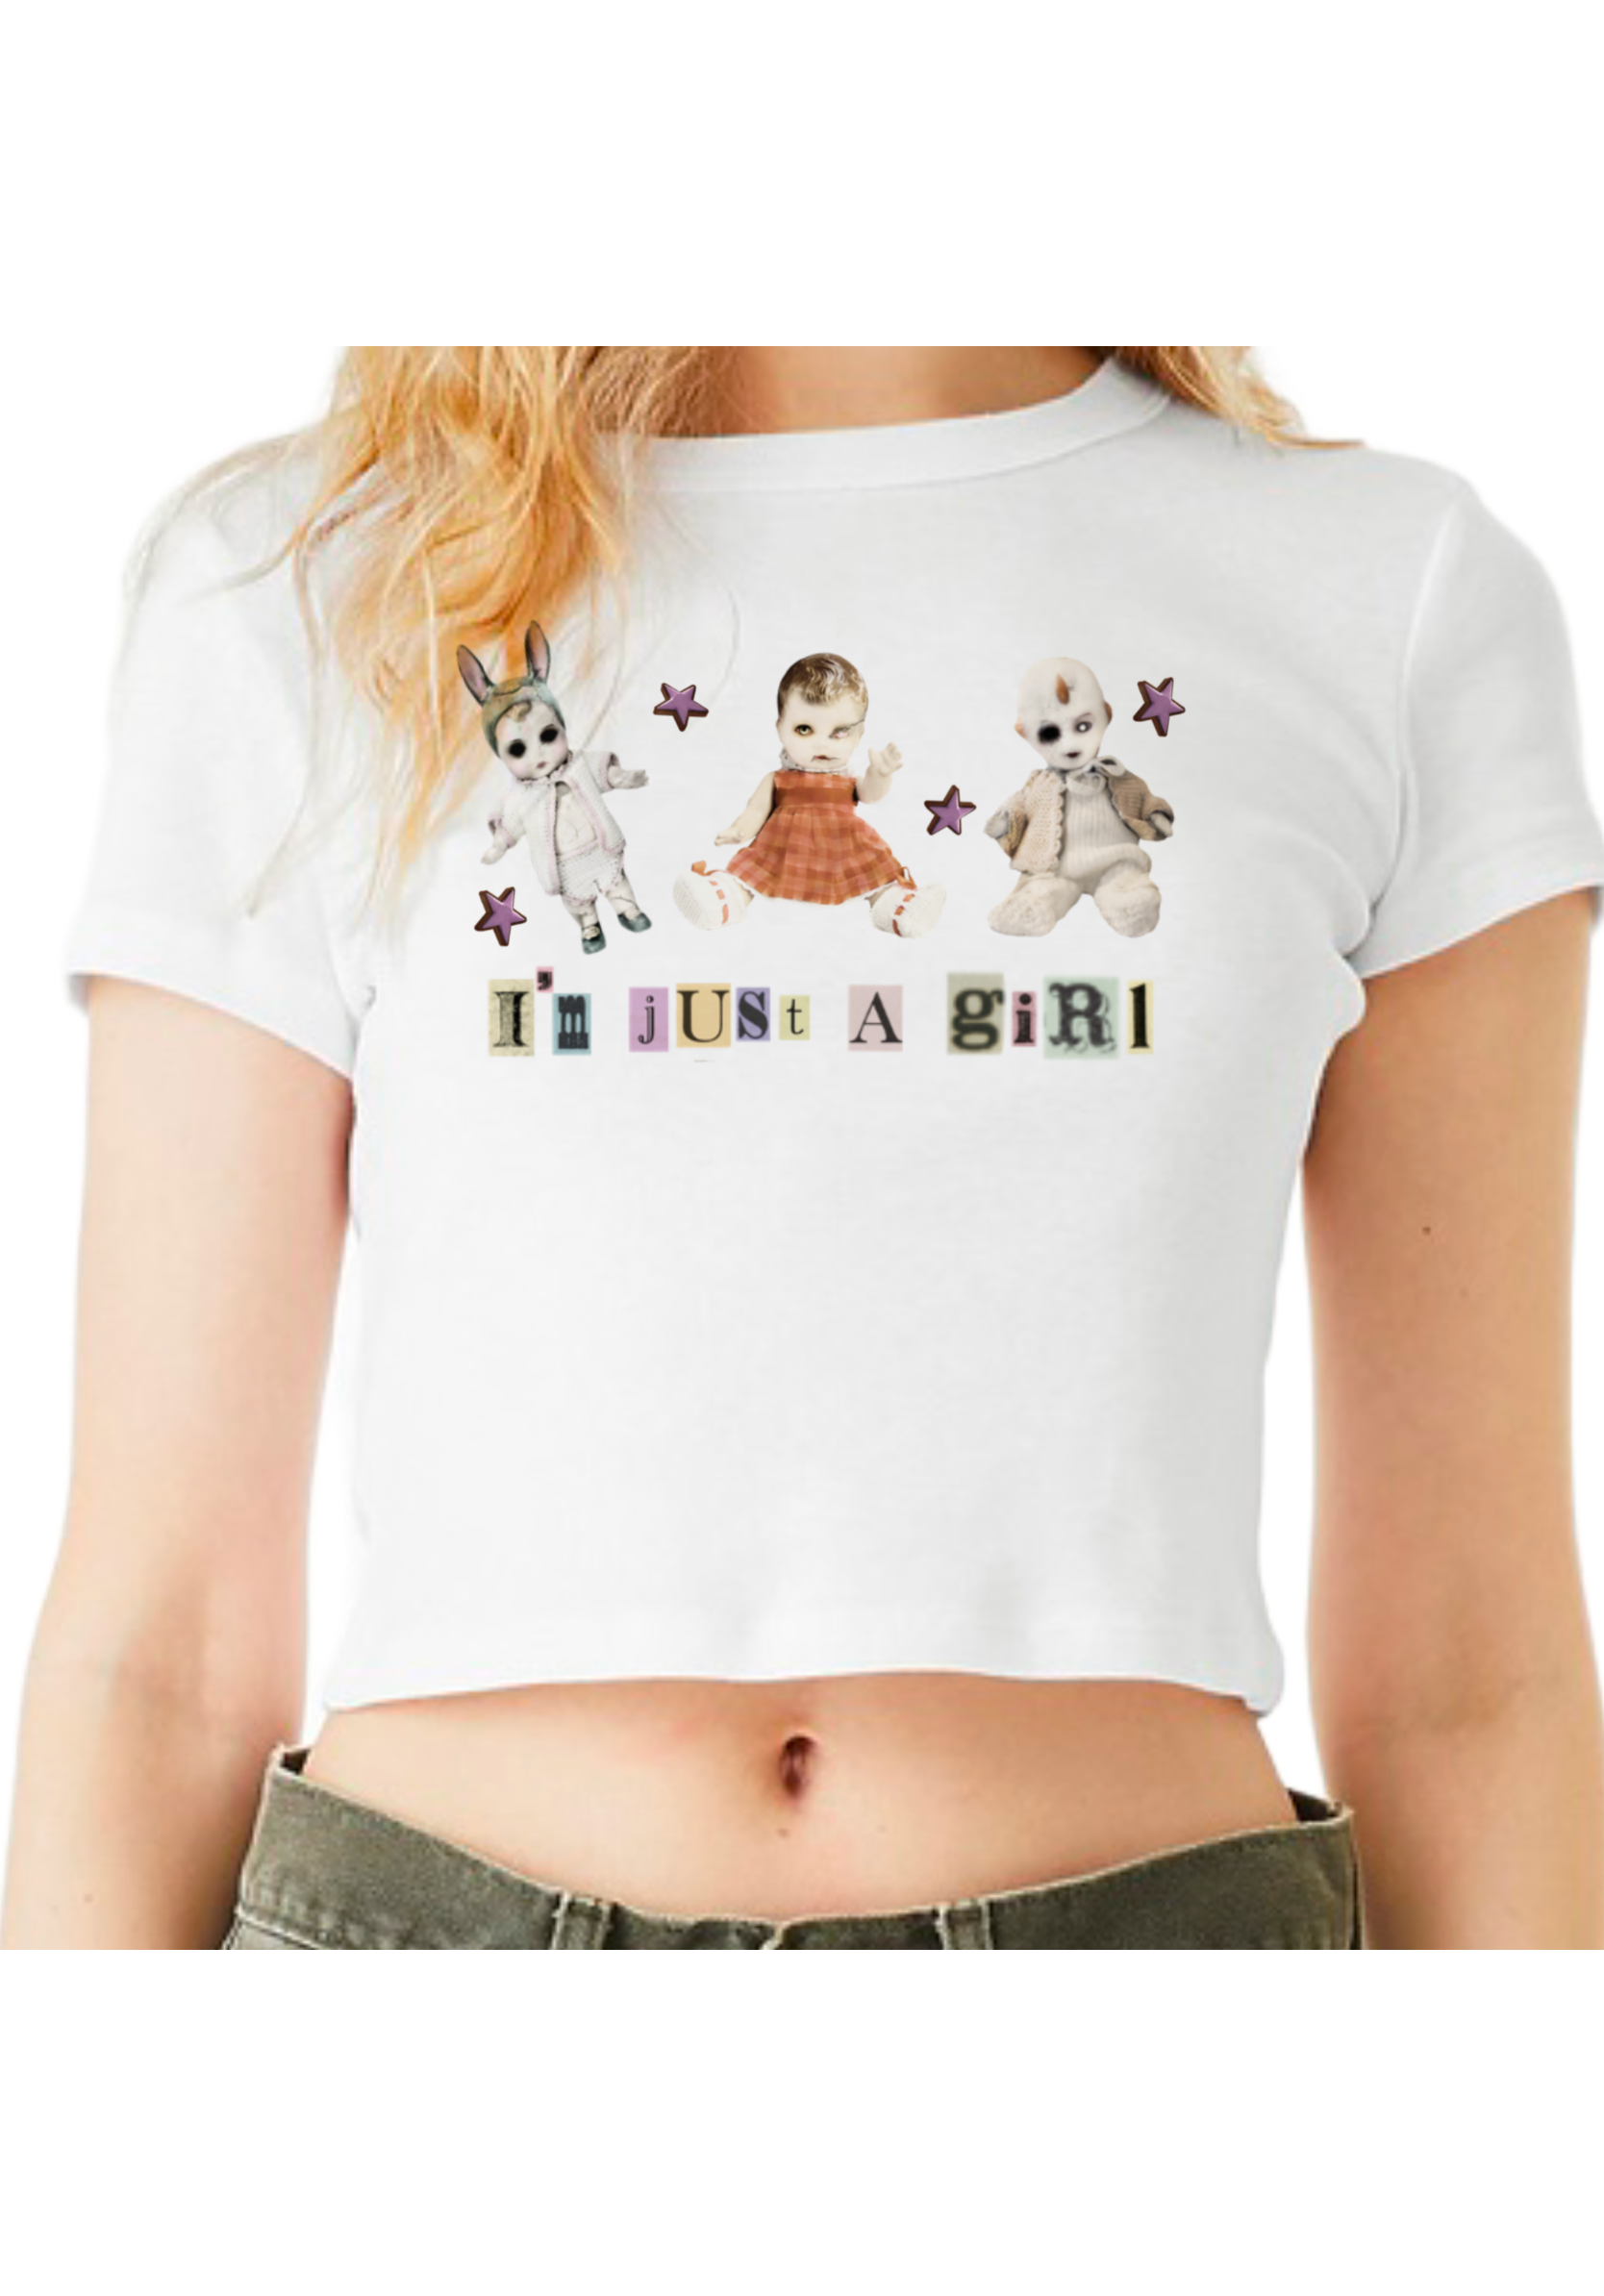 i'm just a girl bb tee